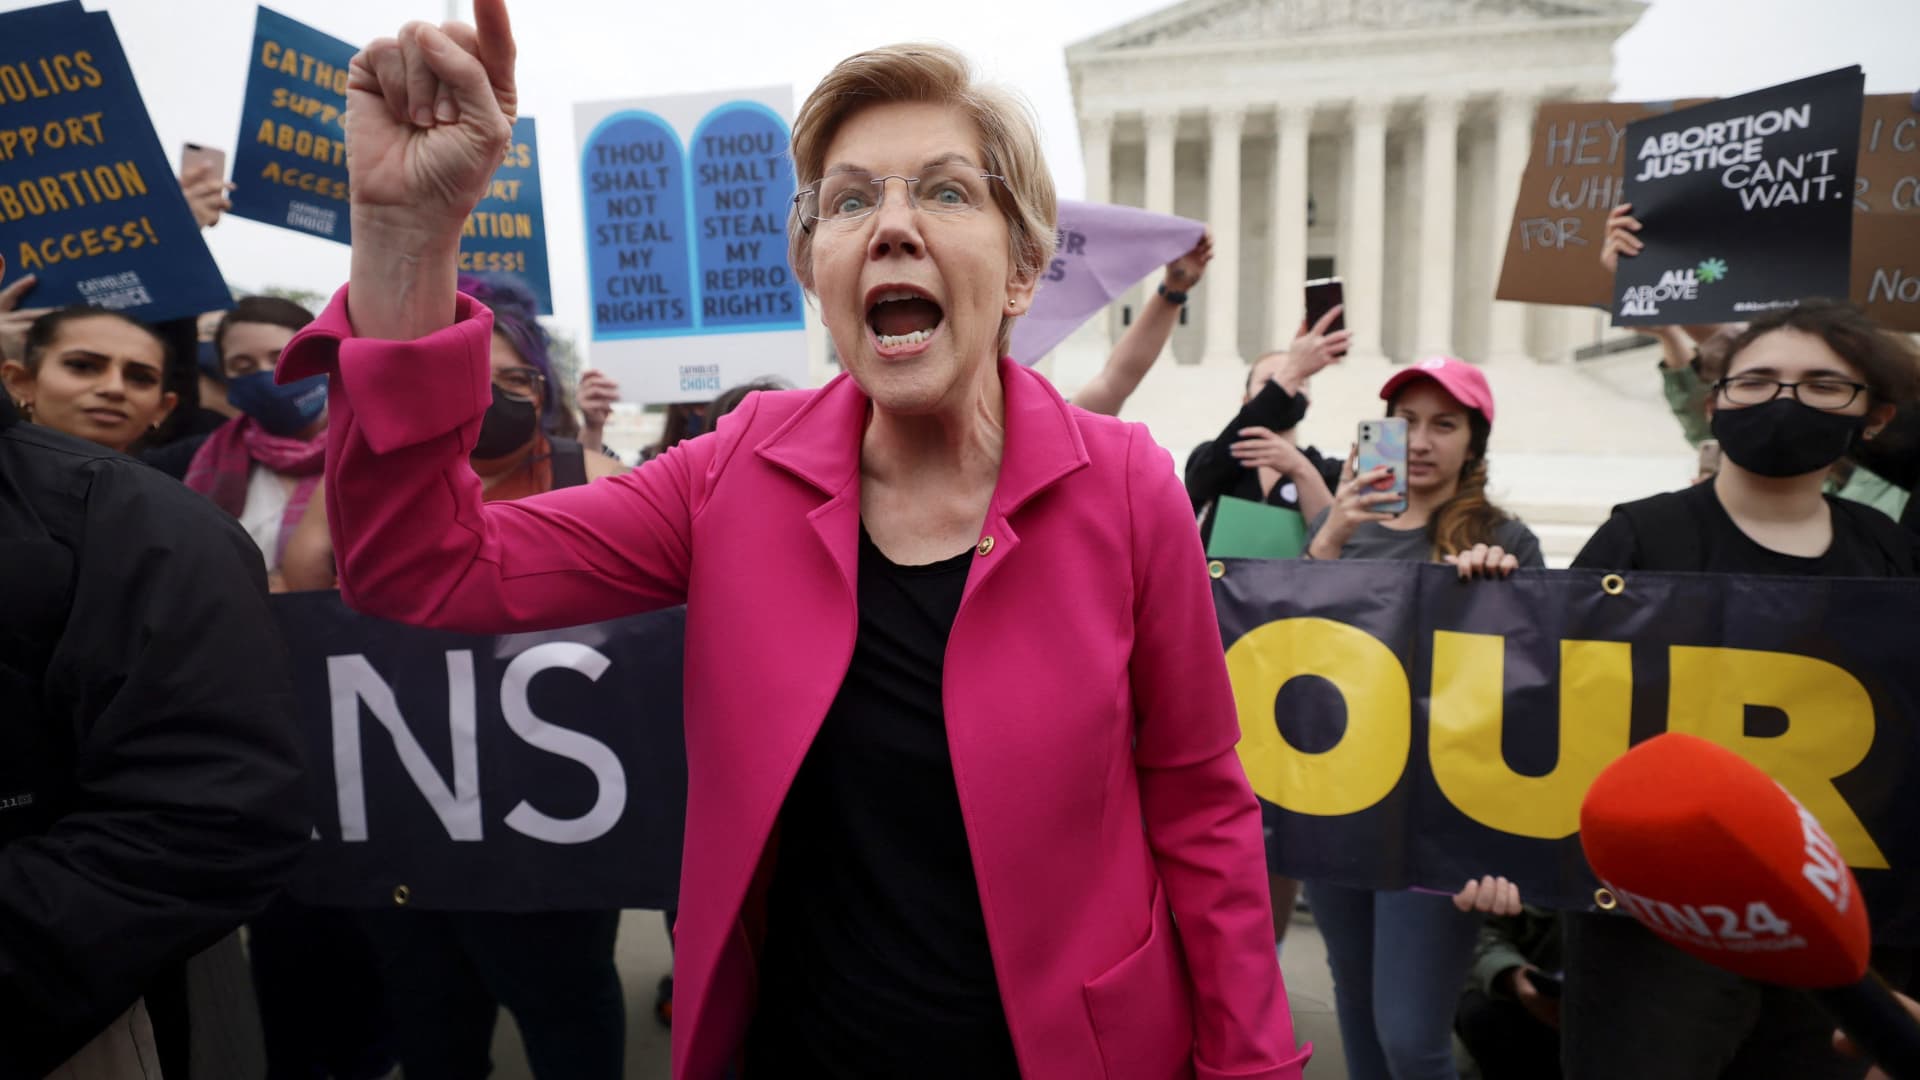 U.S. Senator Elizabeth Warren (D-MA) reacts during a protest outside the U.S. Supreme Court, after the leak of a draft majority opinion written by Justice Samuel Alito preparing for a majority of the court to overturn the landmark Roe v. Wade abortion rights decision later this year, in Washington, May 3, 2022.